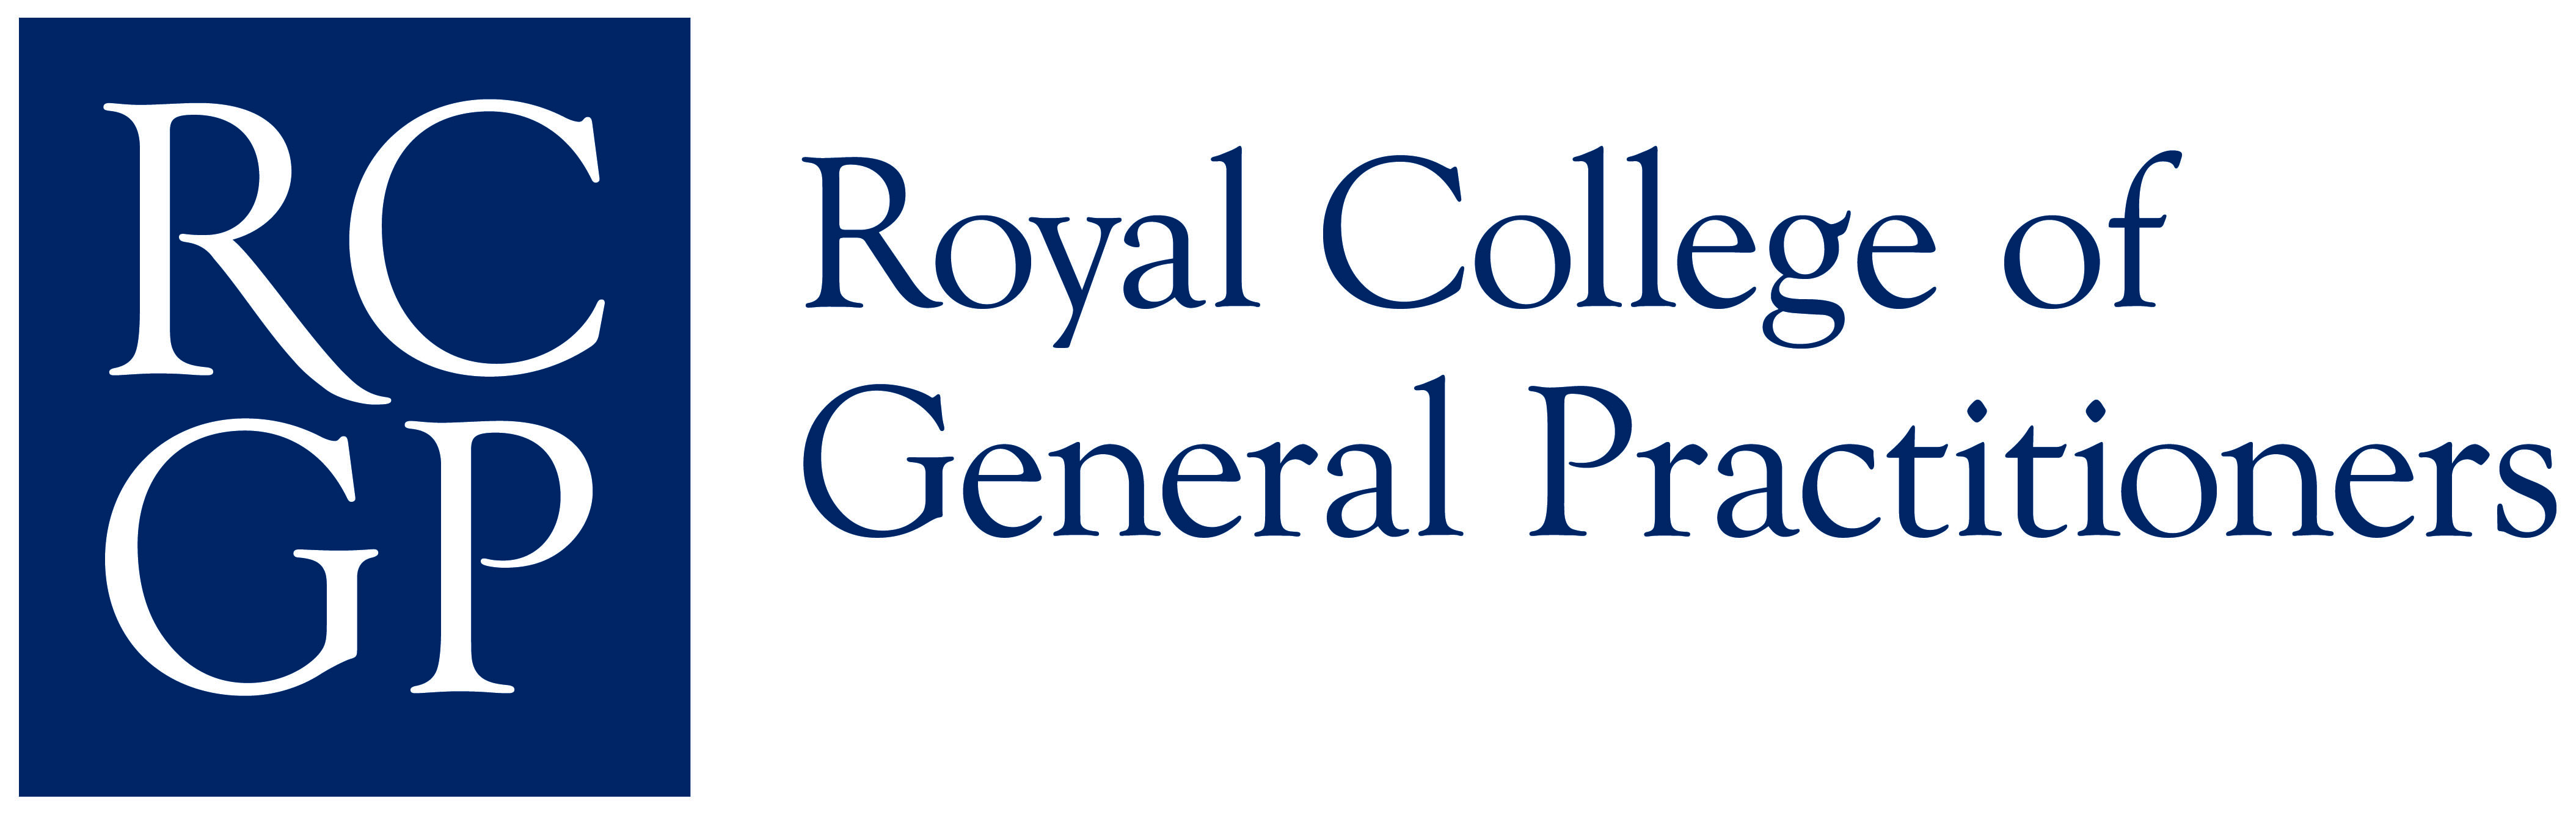 rcgp research paper of the year 2021